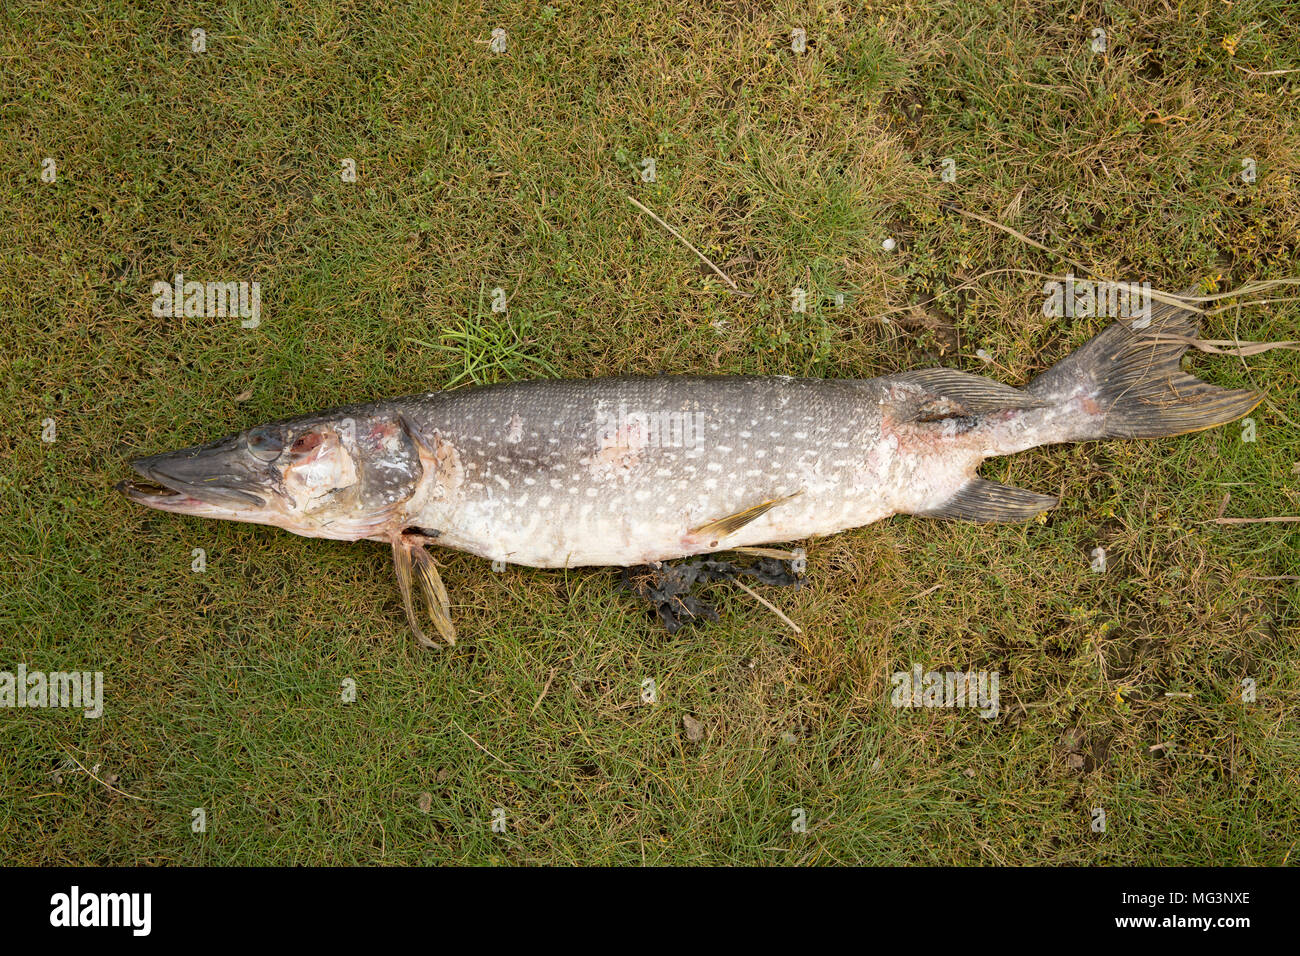 A pike, Esox lucius, found dead on saltmarshes along the estuary of the River Keer near Carnforth Lancashire England UK. Cause of death unknown. Stock Photo